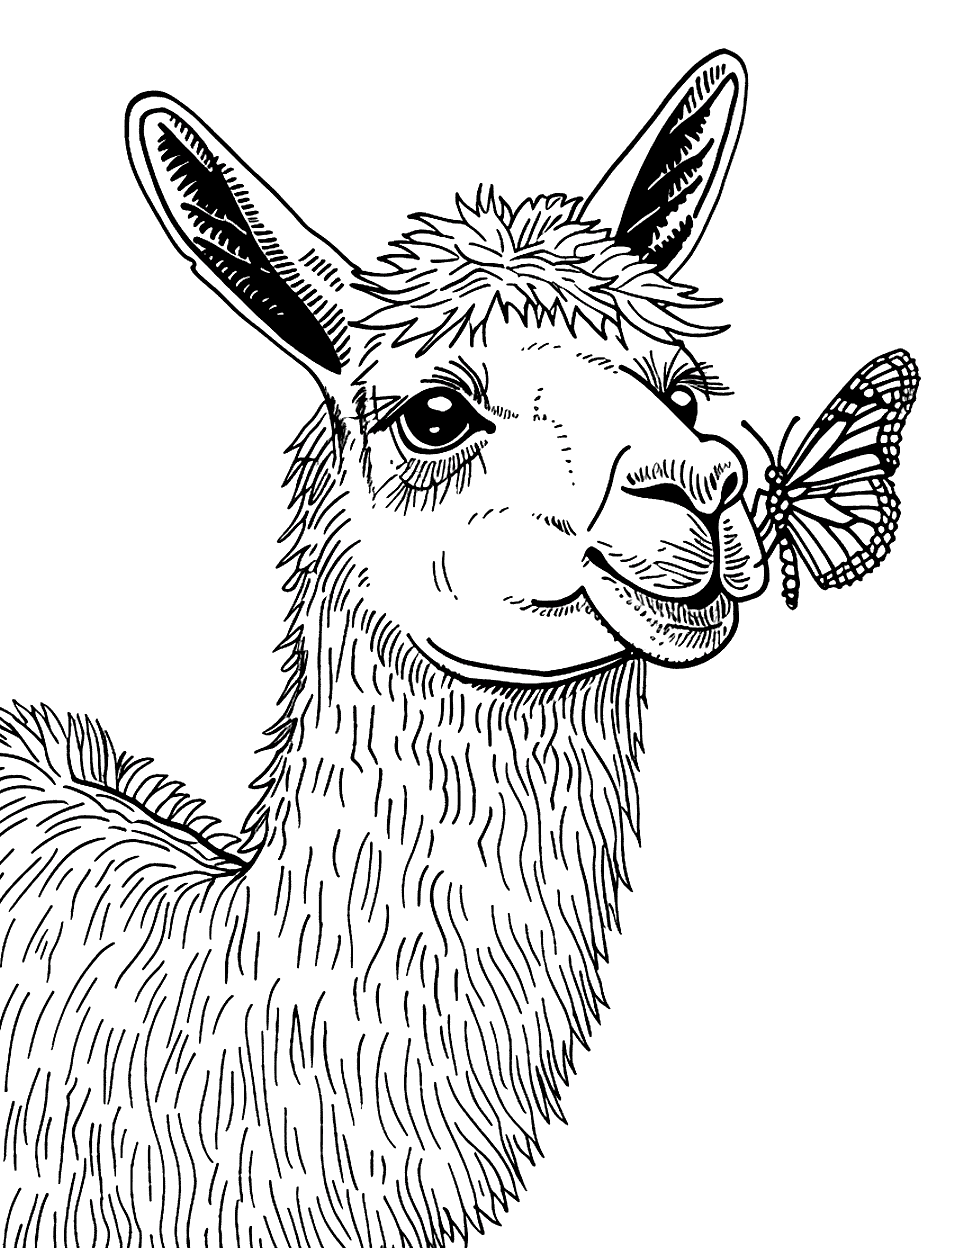 Llama and a Butterfly Coloring Page - A curious llama looking at a butterfly on its nose.